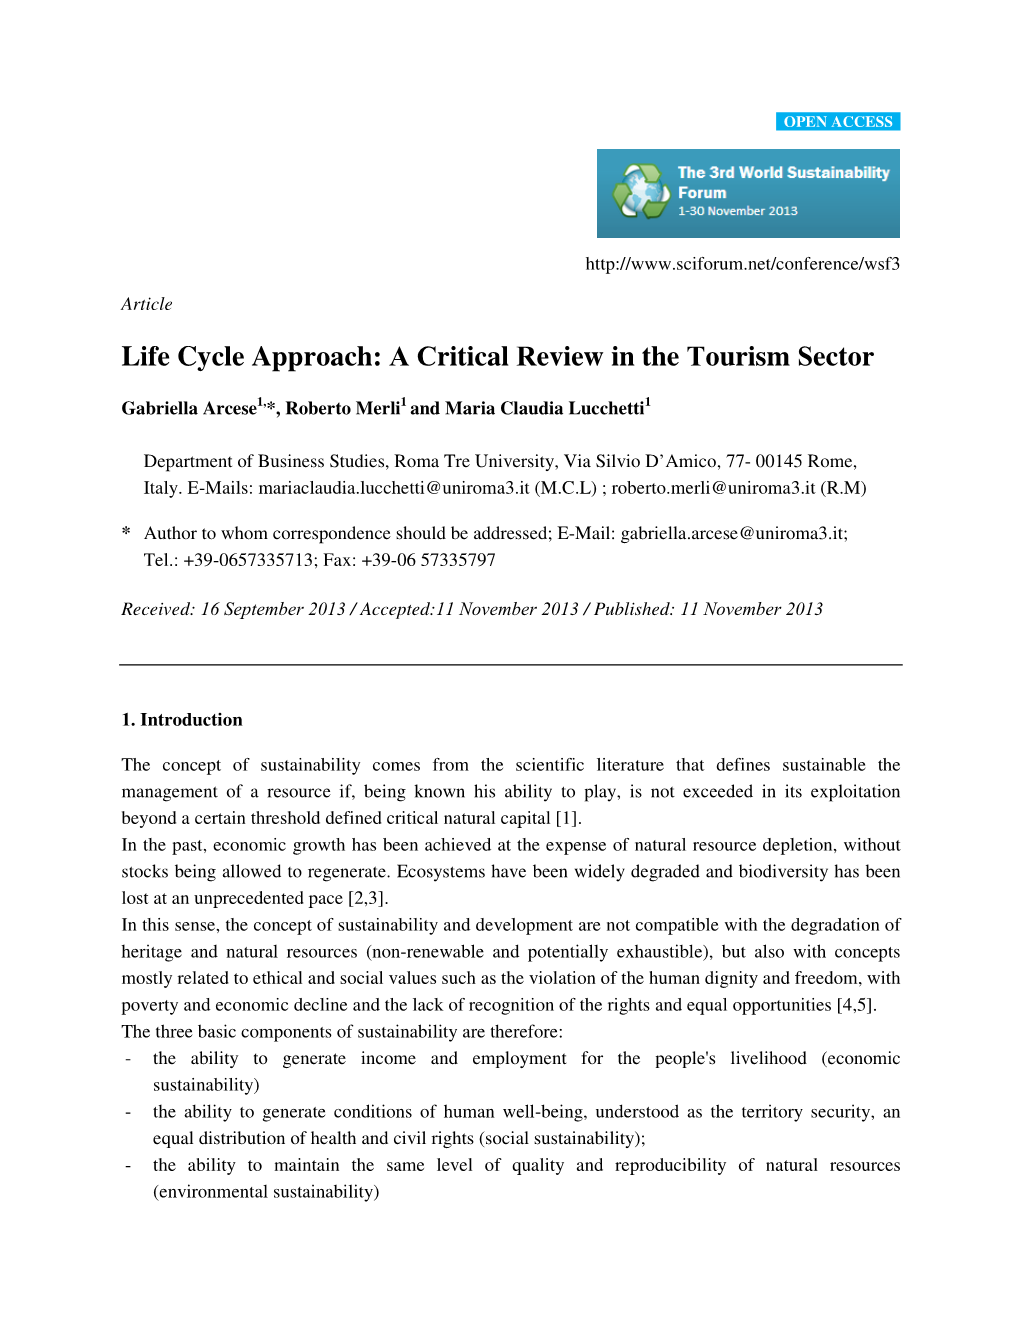 Life Cycle Approach: a Critical Review in the Tourism Sector